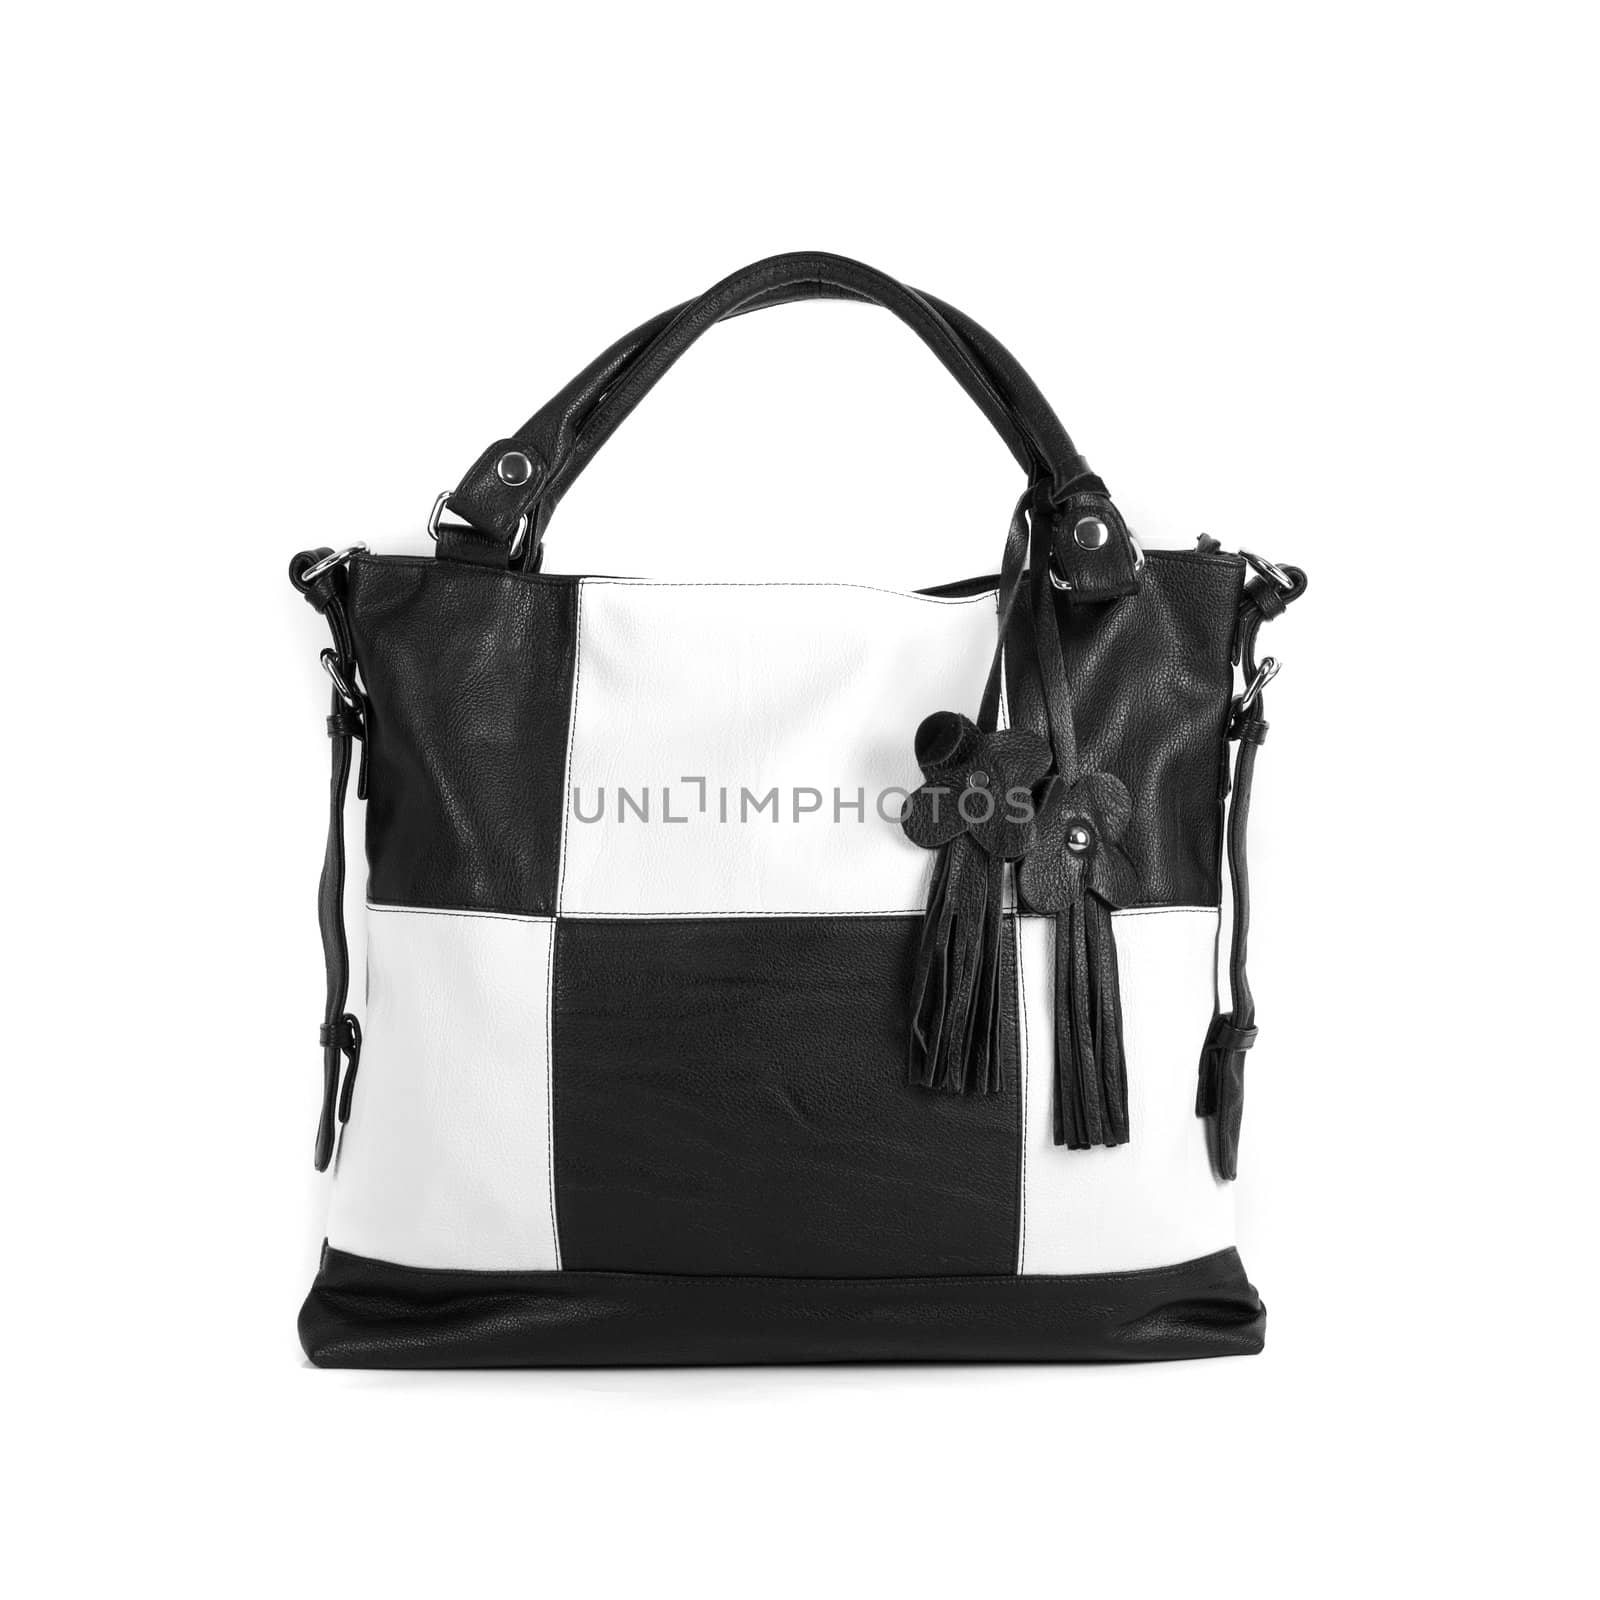 Black and white women bag isolated on white background